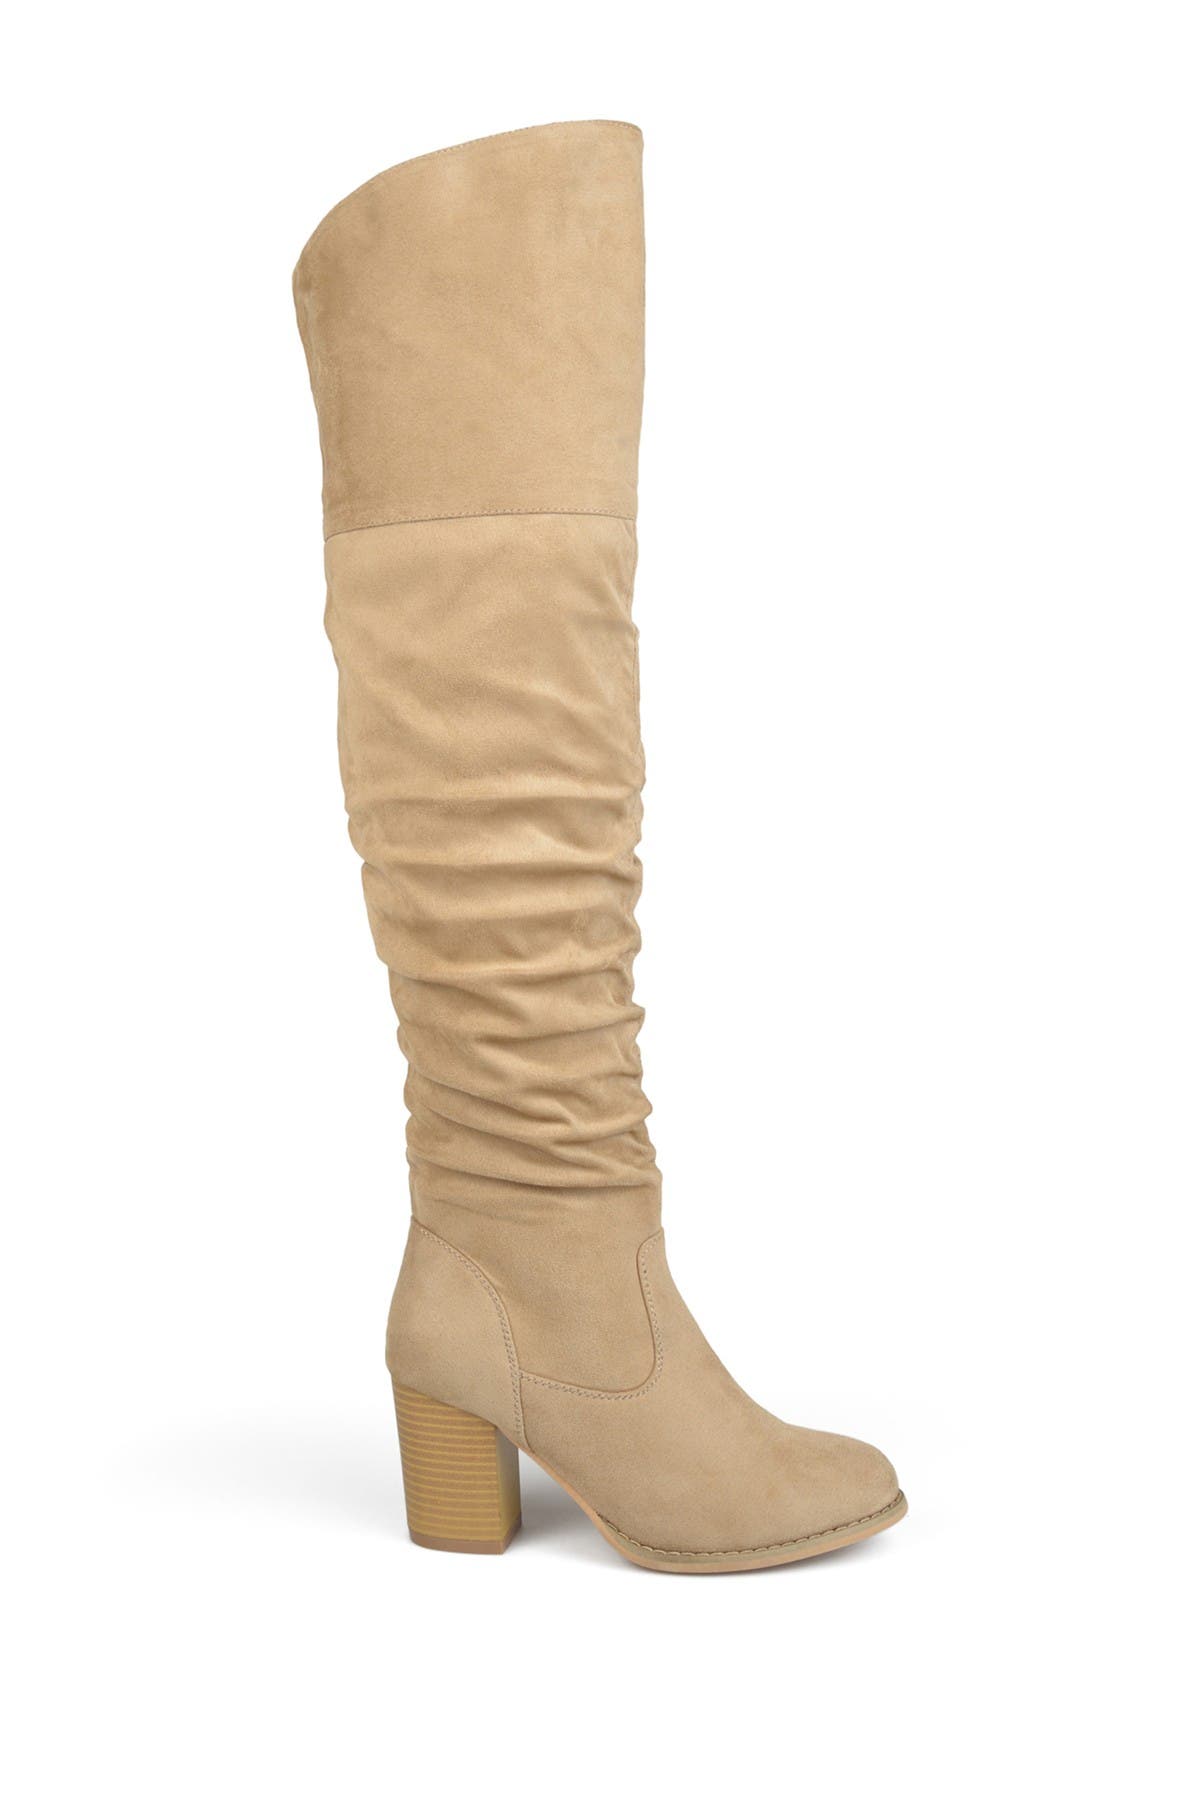 JOURNEE Collection | Kaison Ruched Tall Boot - Extra Wide Calf ...